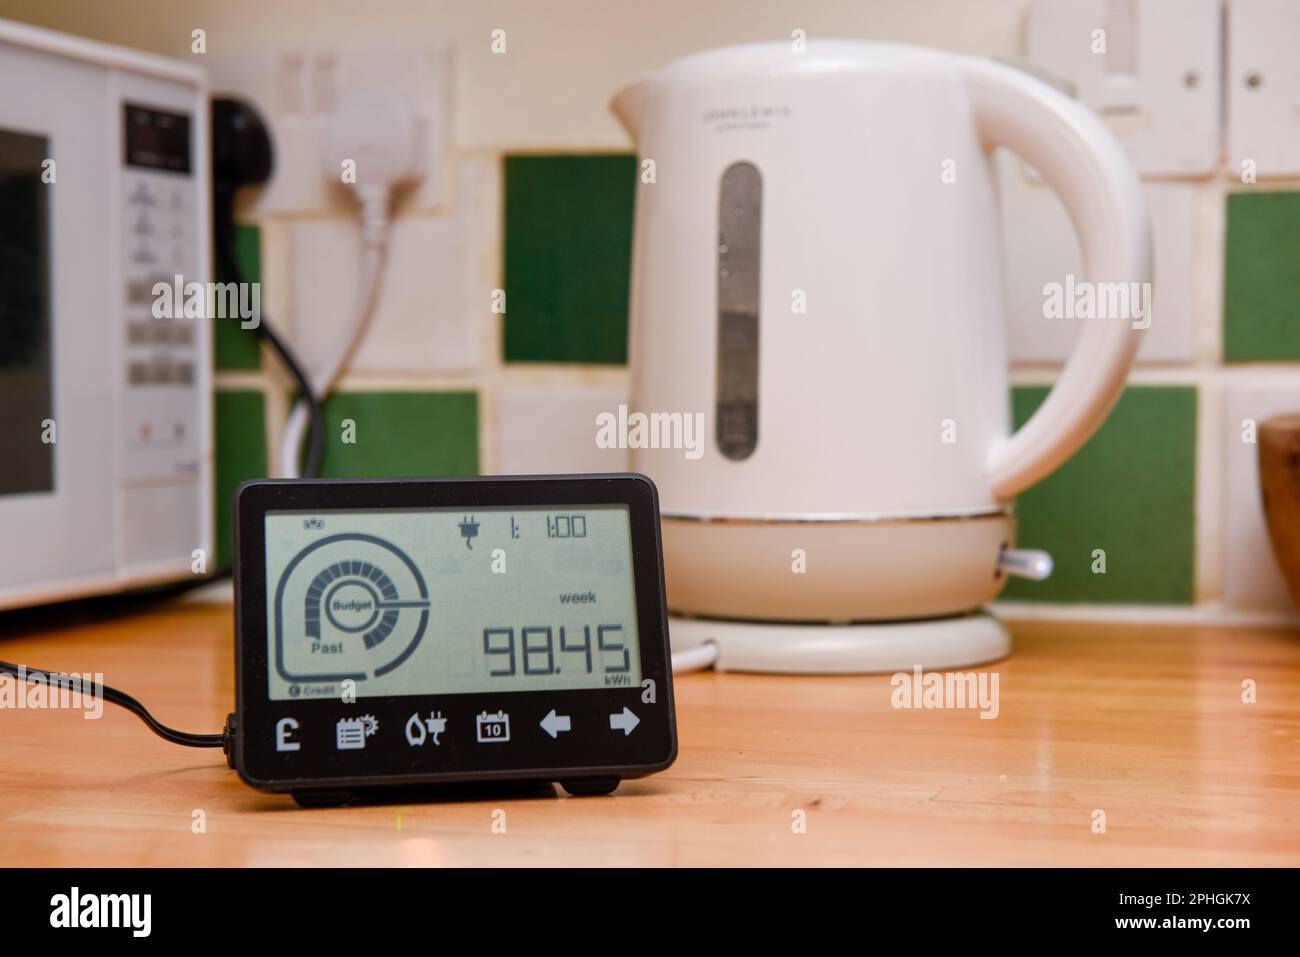 Smart energy meter in a home interior to monitor electricity usage in the house and reduce cost of living price Stock Photo